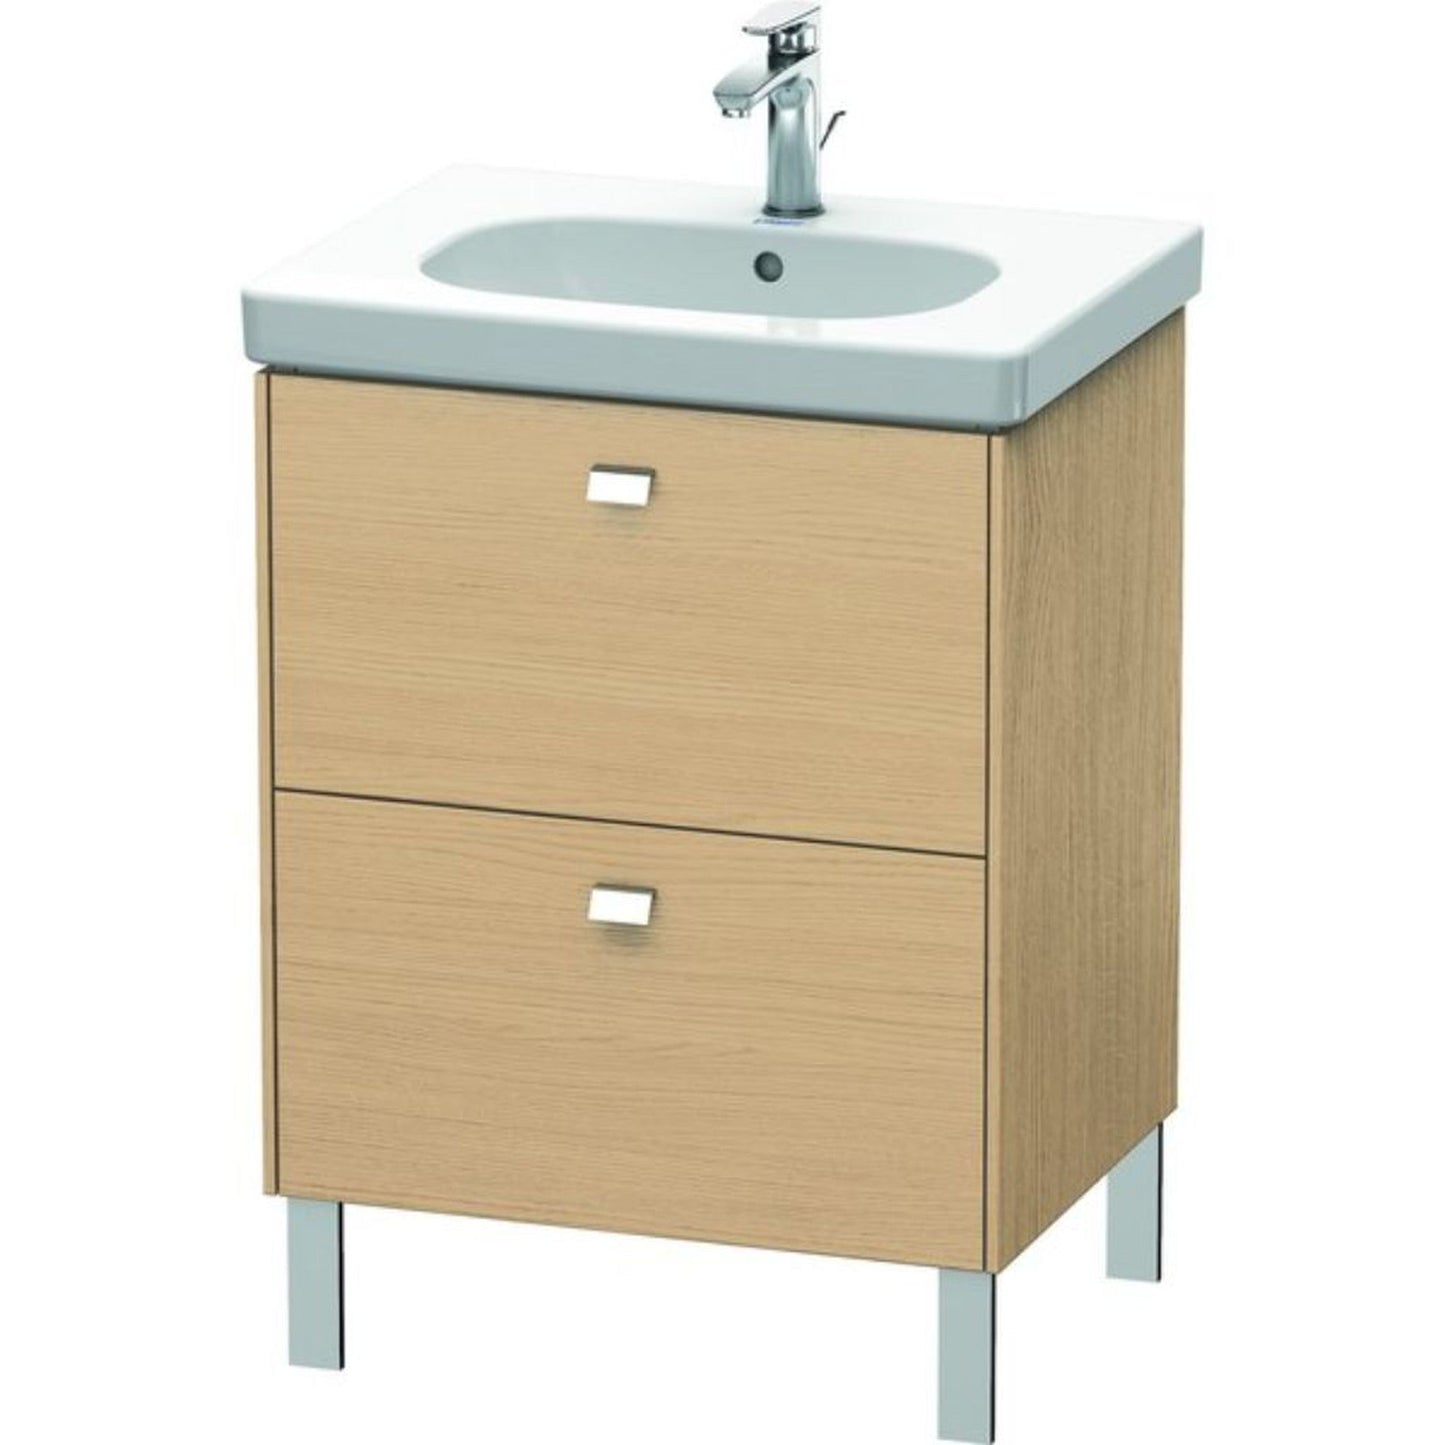 Duravit Brioso BR44250 24" x 27" x 18" Two Drawer Floor Standing Vanity Unit in Natural Oak and Chrome Handle